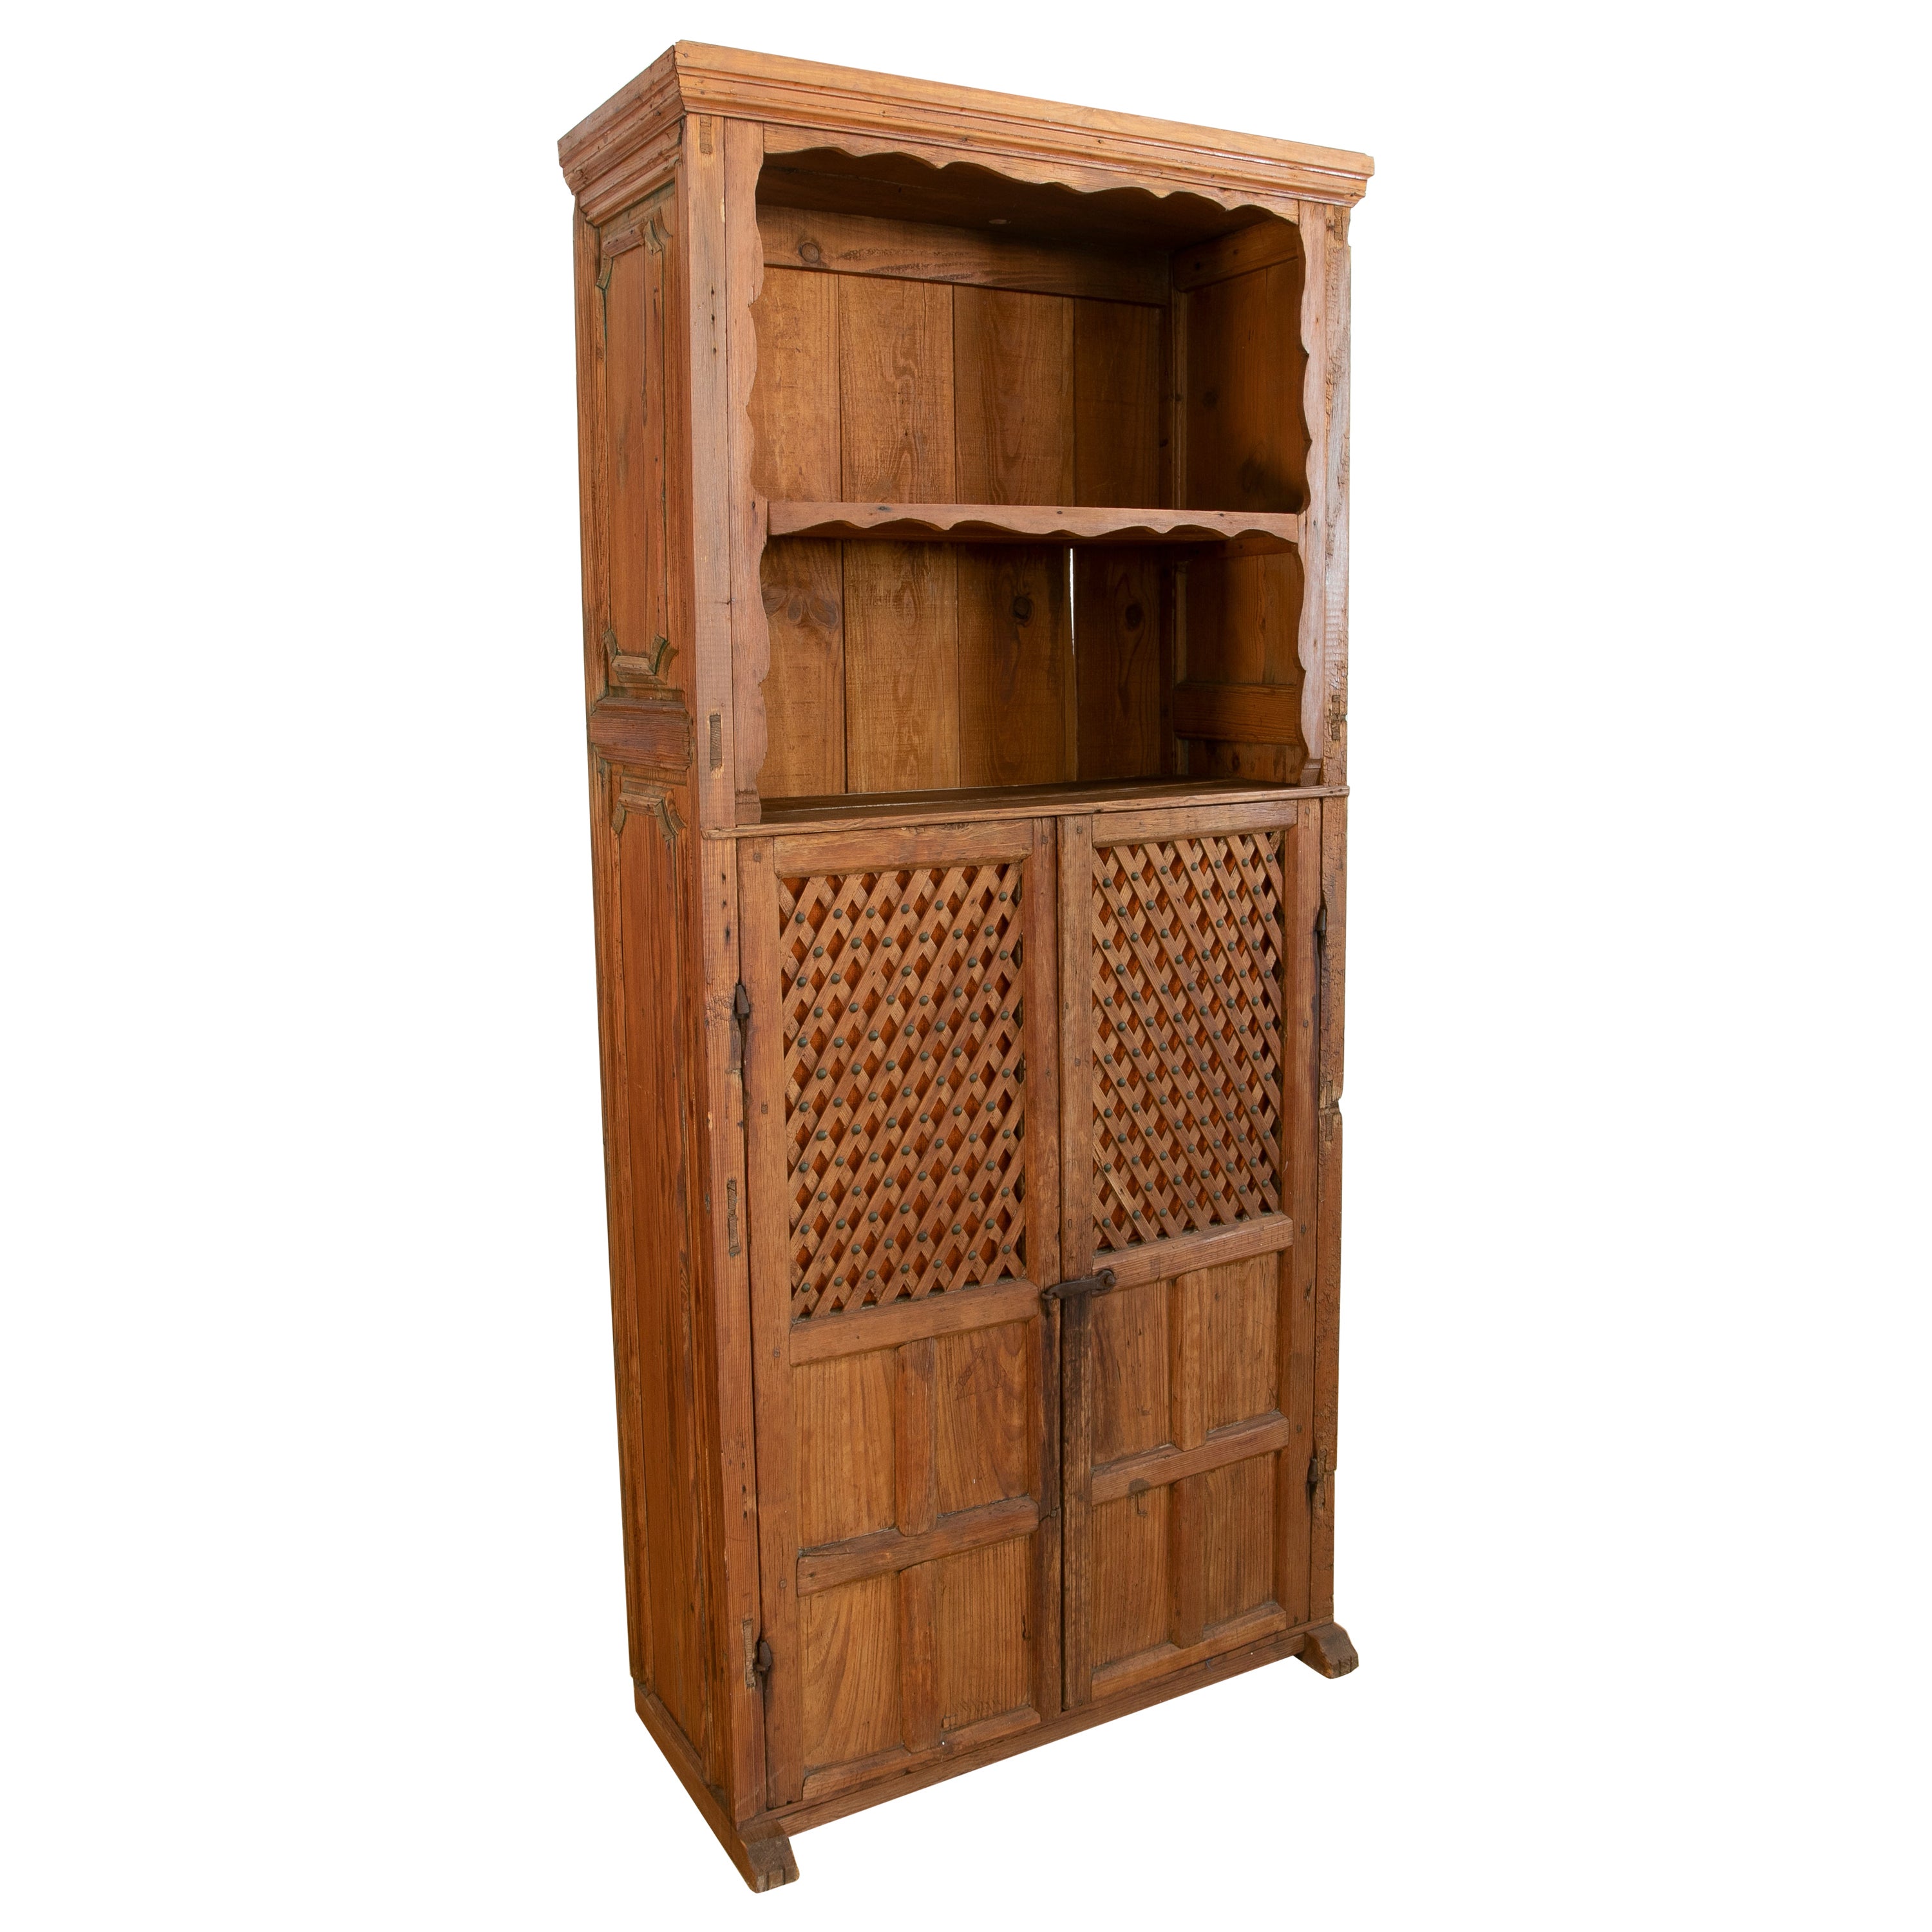 Spanish Wooden Cupboard with Shelves and Lattice Doors